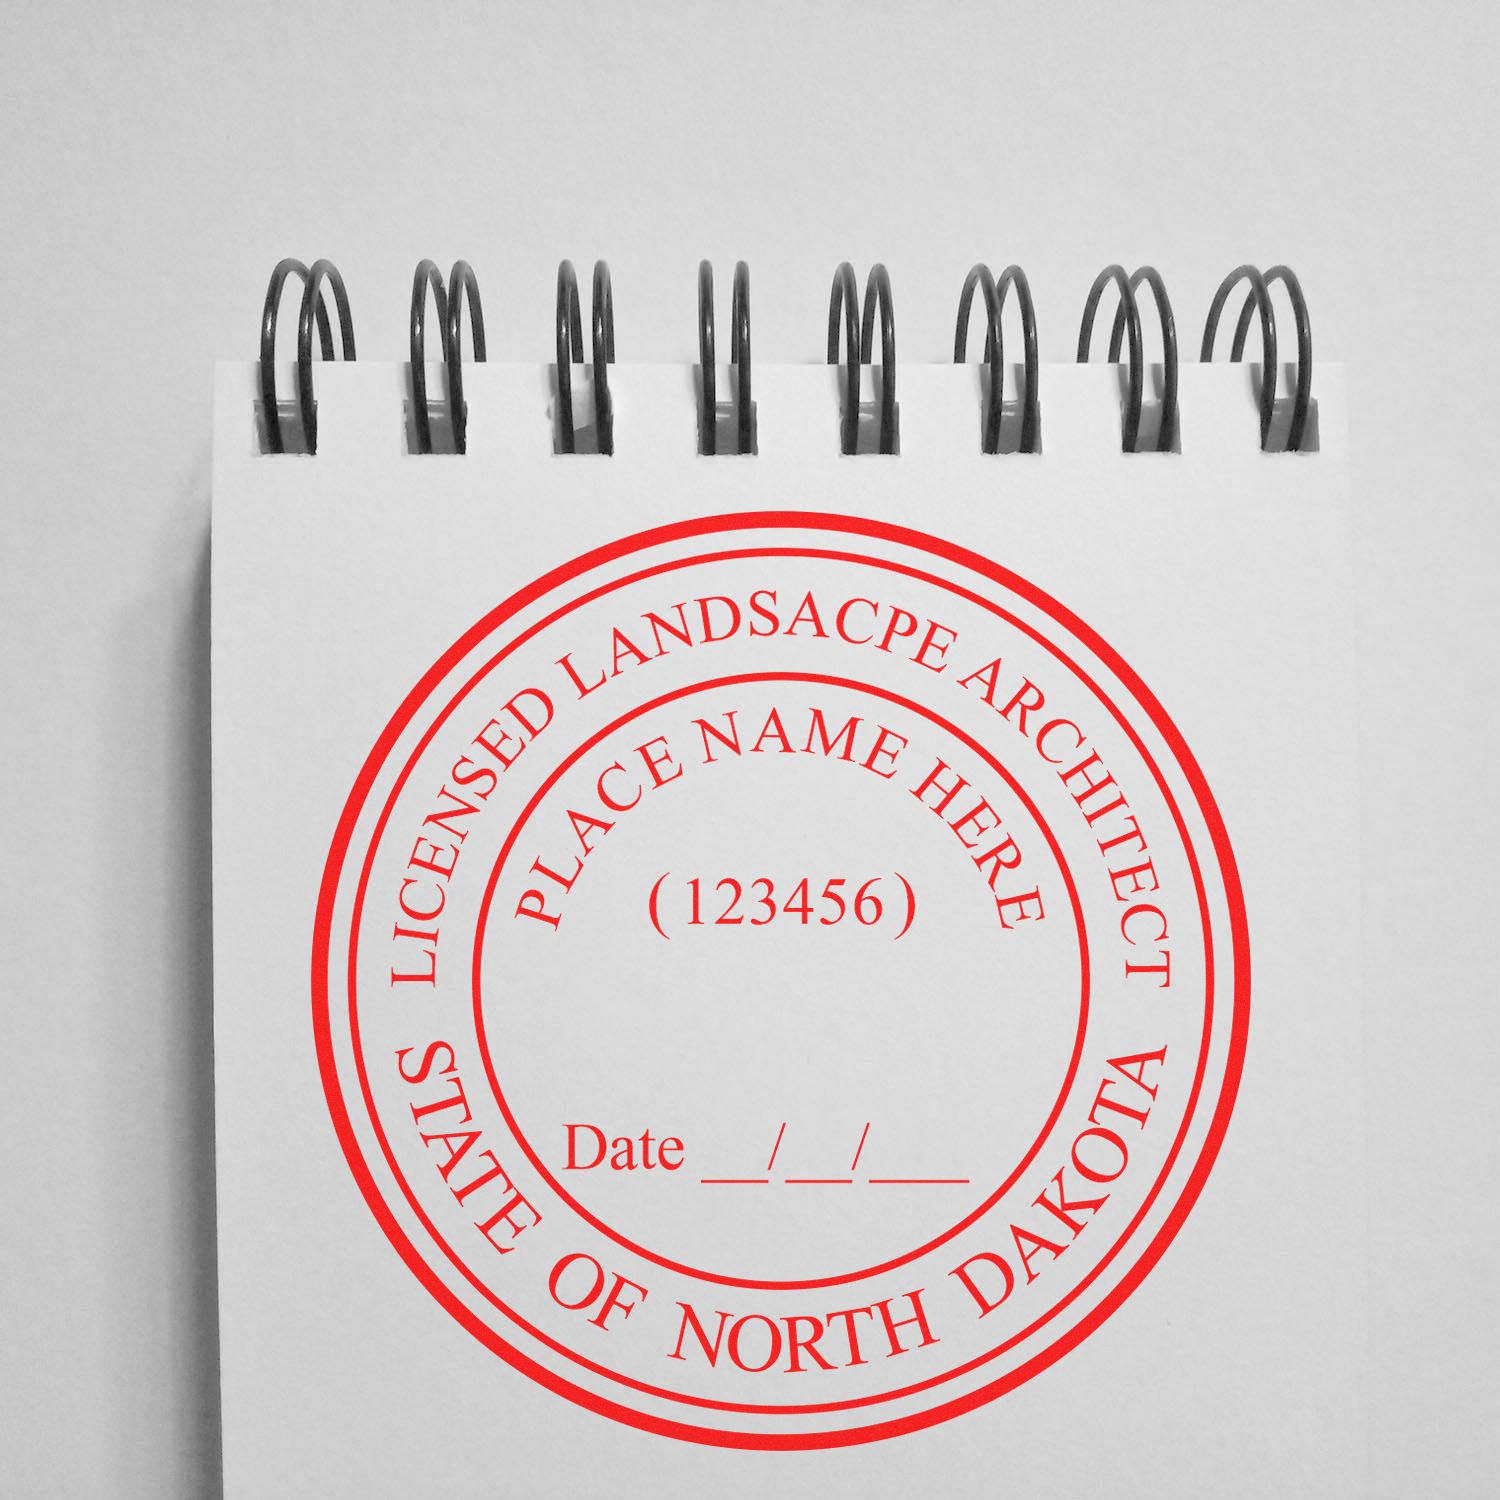 The main image for the North Dakota Landscape Architectural Seal Stamp depicting a sample of the imprint and electronic files